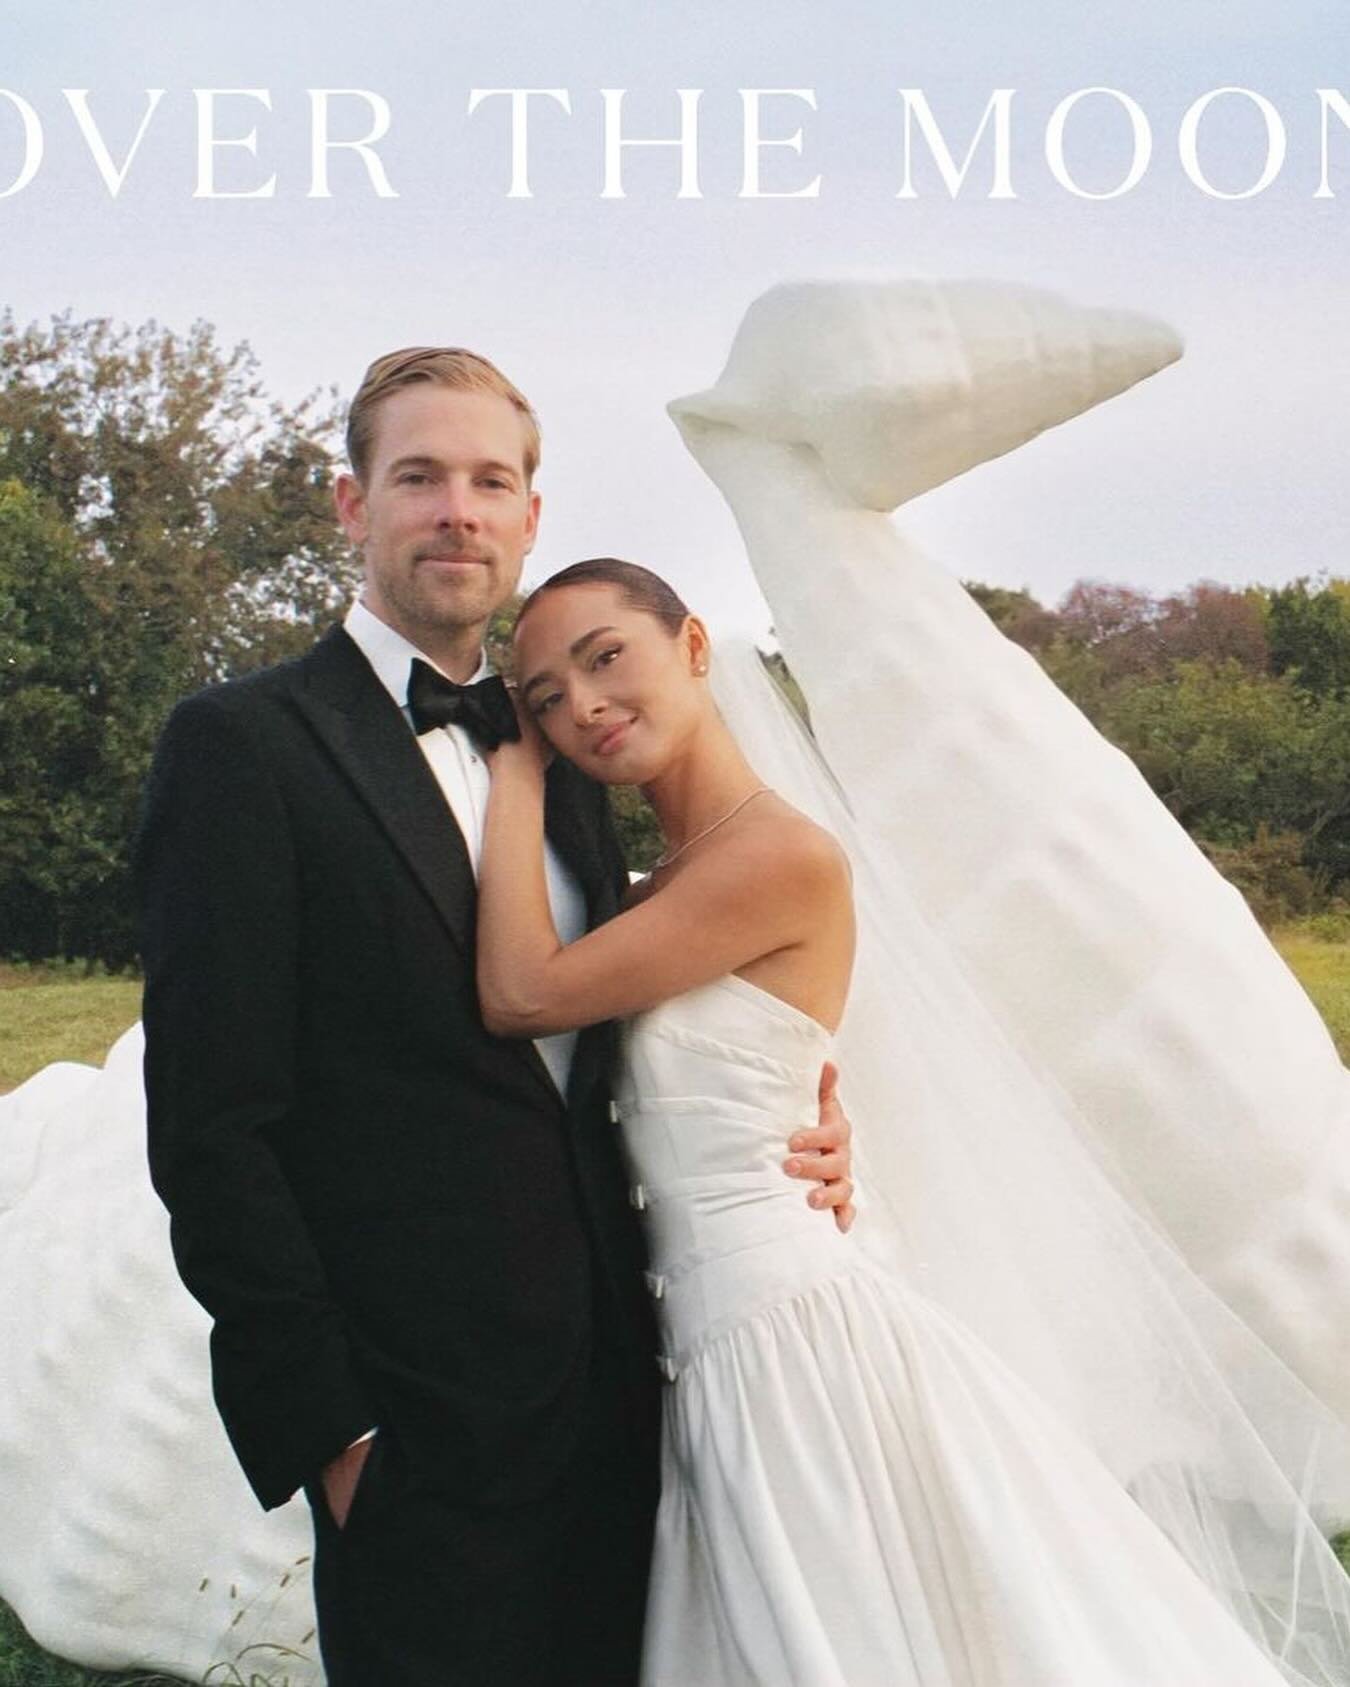 Thrilled to see beautiful @natgawd and @emmett in @overthemoon ! 

Together with @giuliagiancolaevents and other vendors we performed a miracle by moving the entire wedding up a day, just the week of the wedding, to avoid Hurricane Nigel!

Now you kn